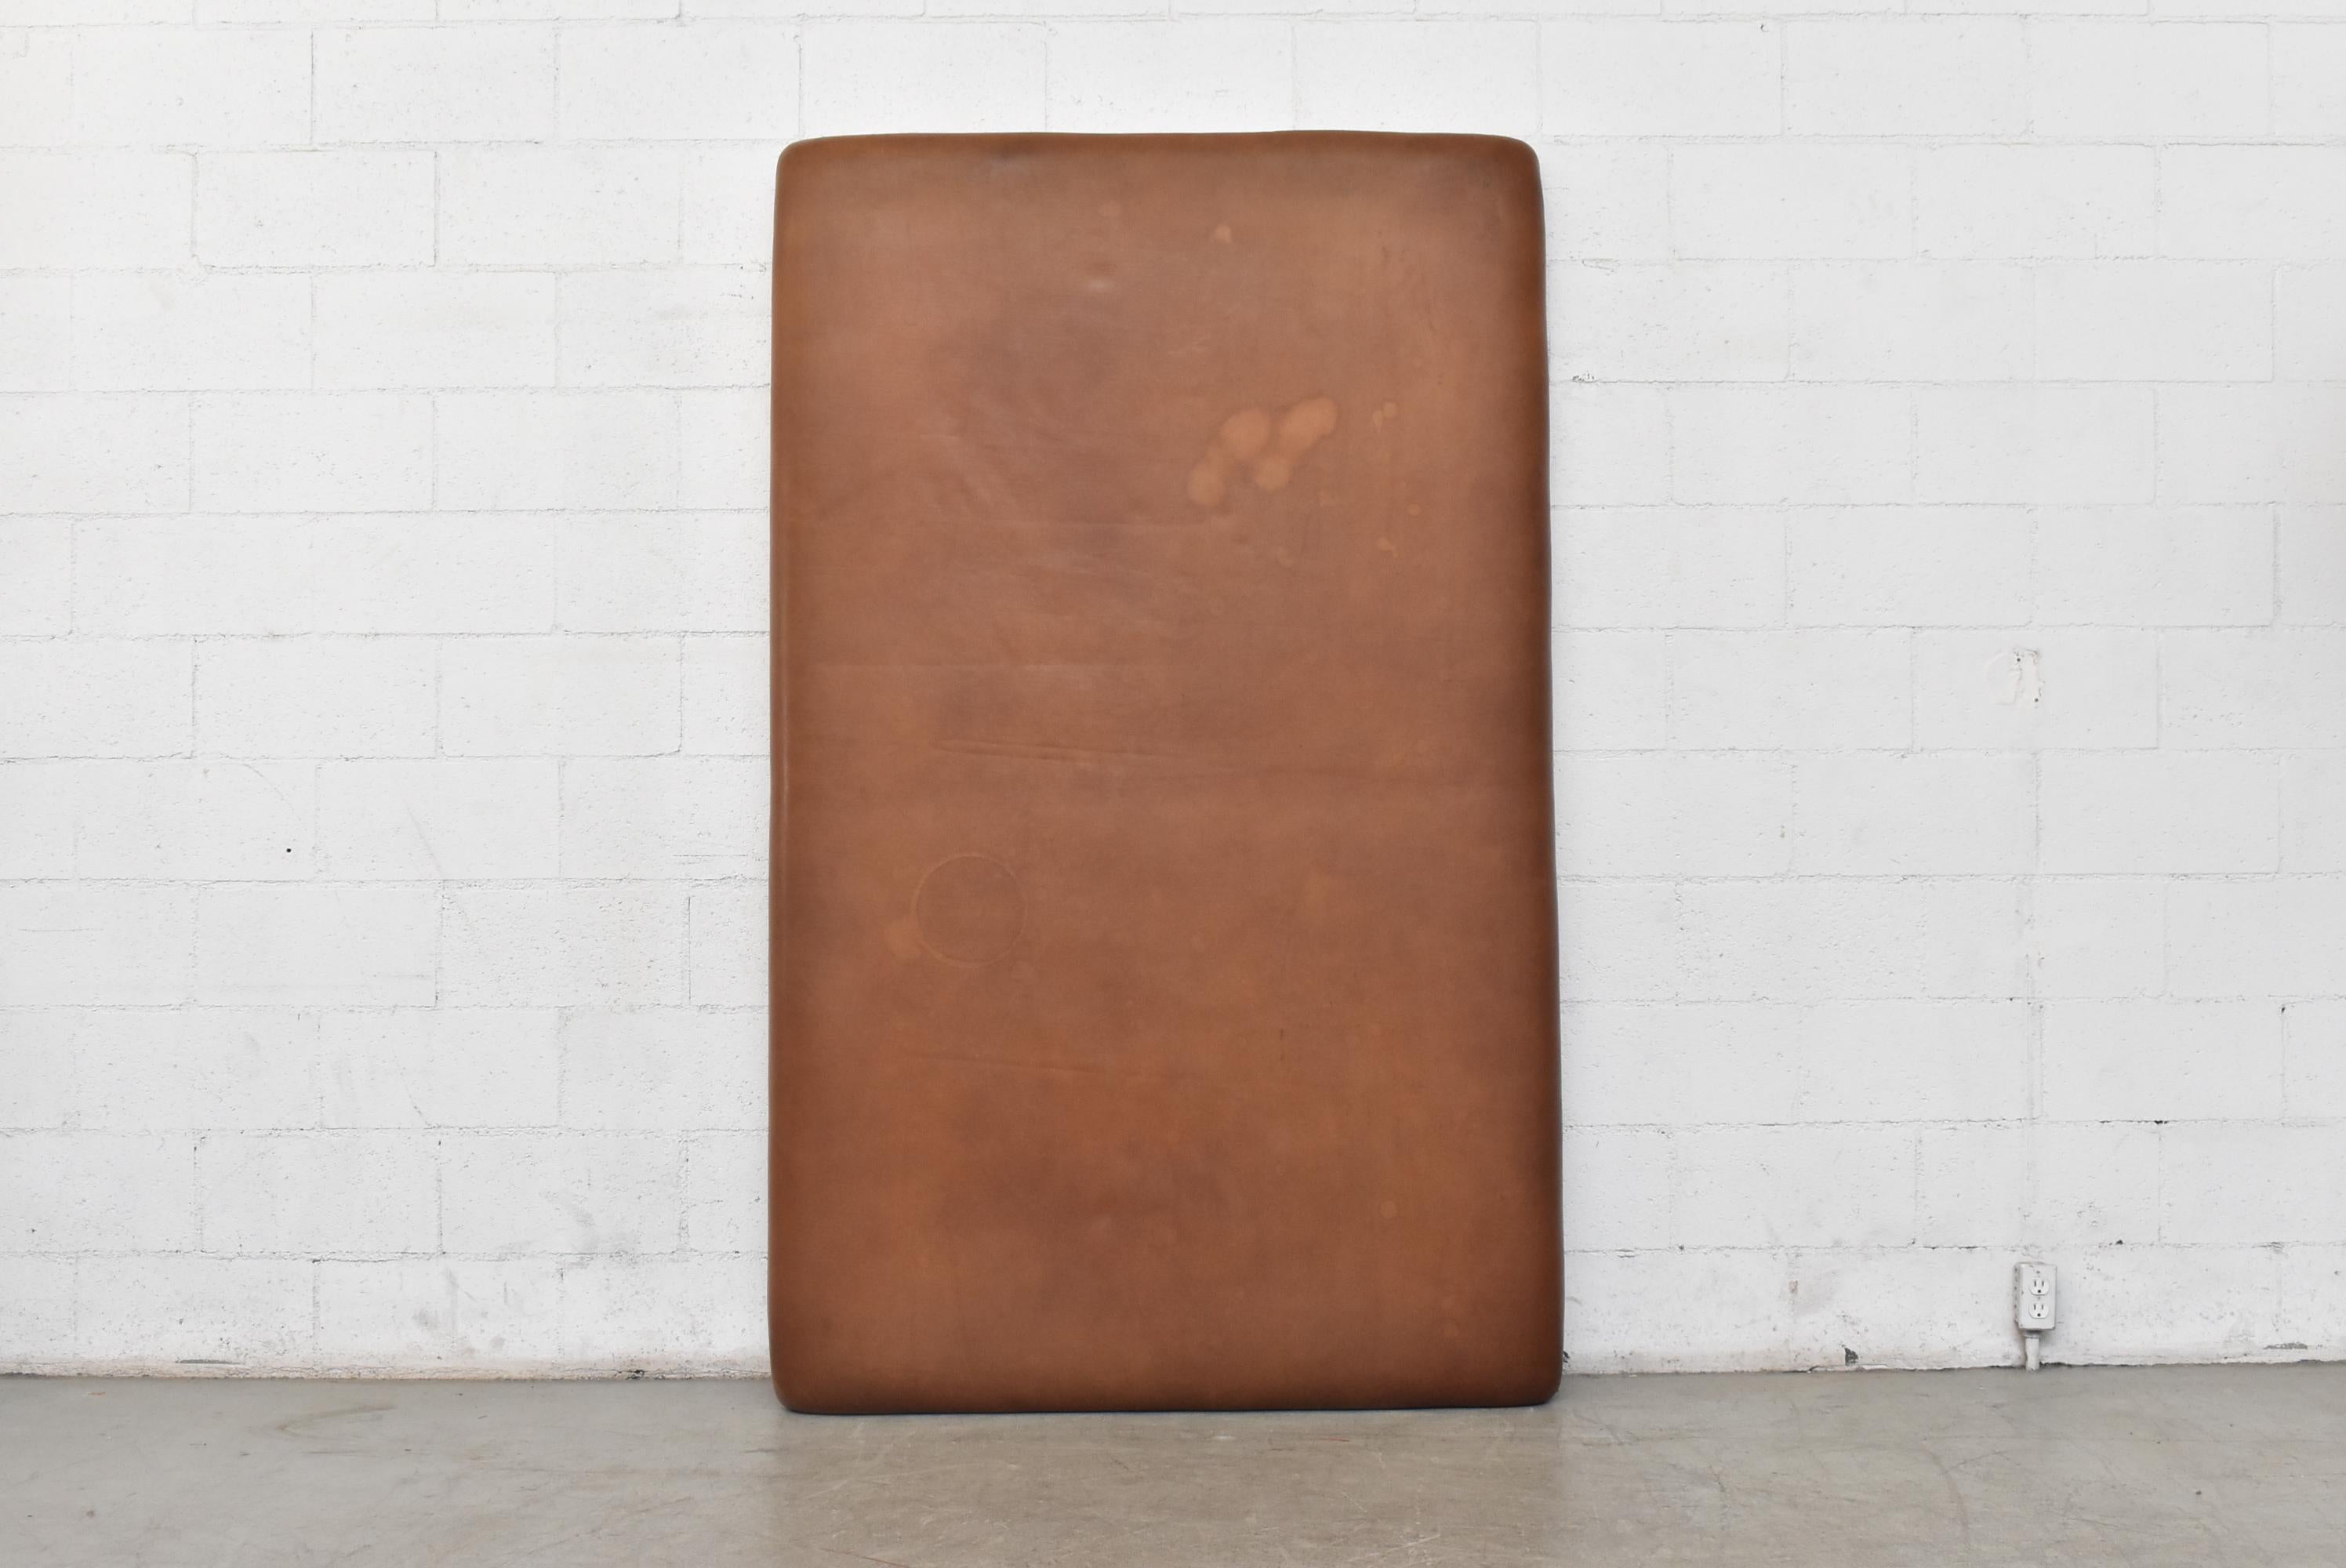 Extra-large natural leather gym mat with heavy wooden frame. Perfect for a king sized headboard. In original condition with visible wear, some staining and nice patina. Well loved.